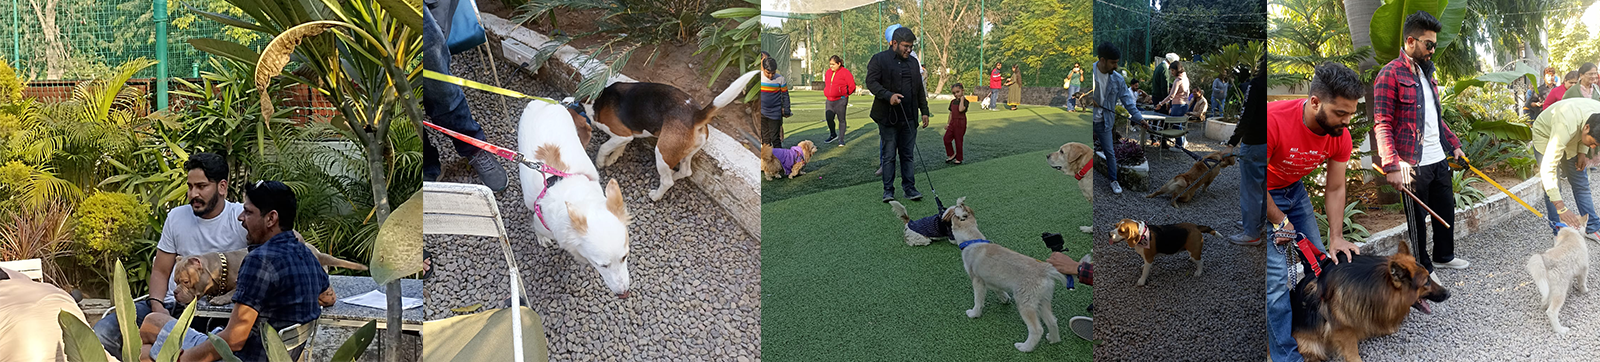 Petsfamilia’s Get-Together For Dog Pets And Their Pawrents